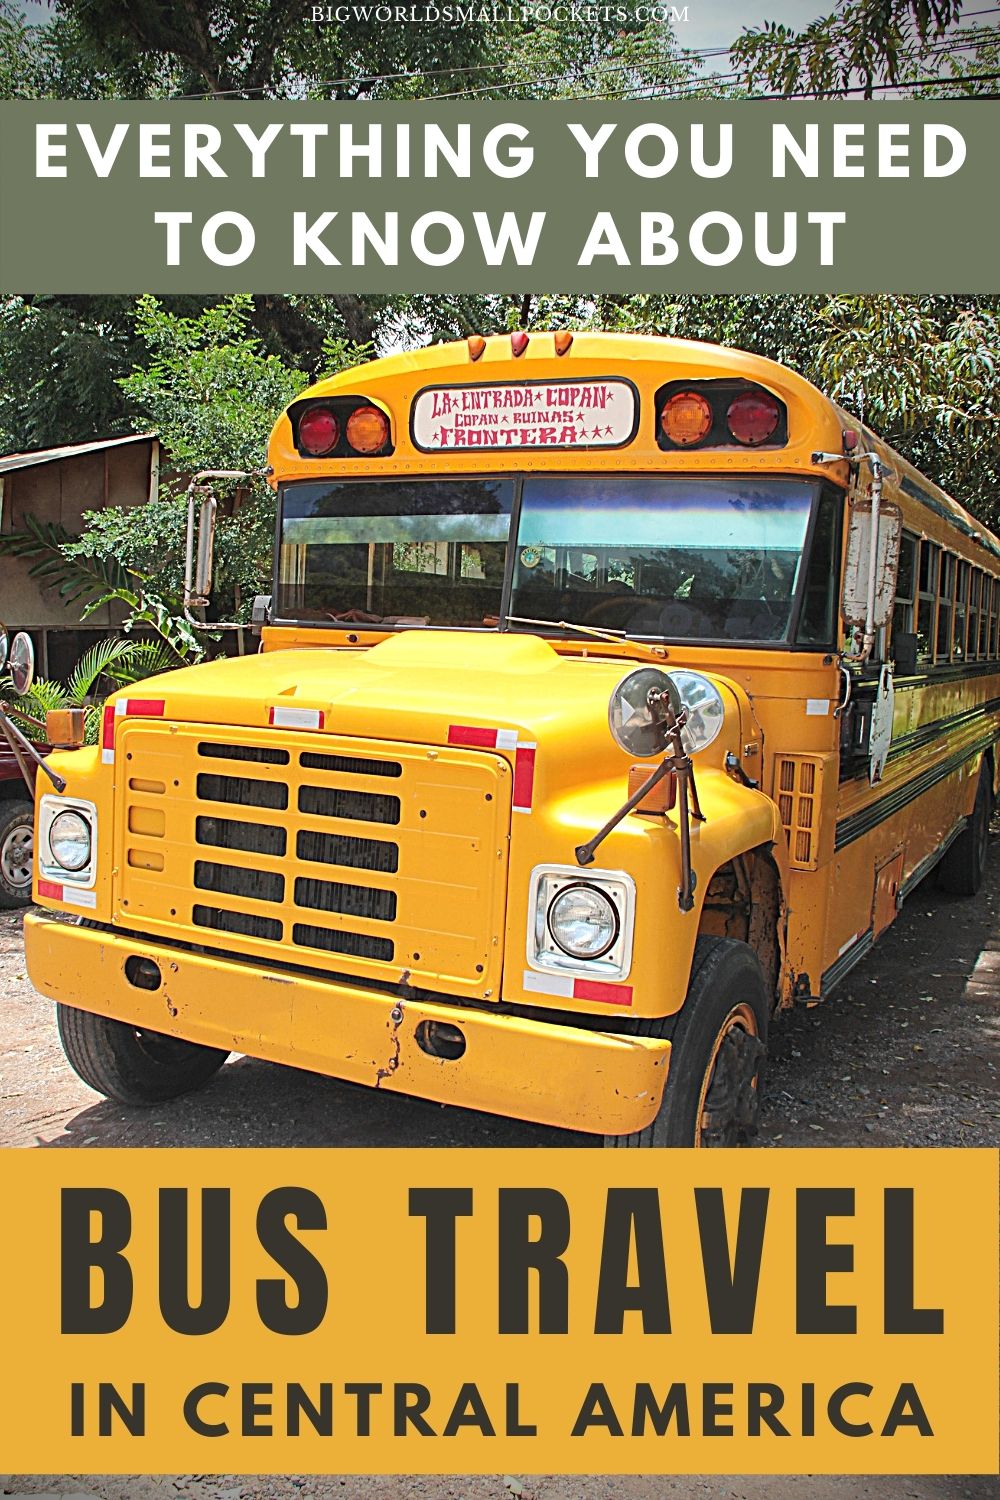 All You Need To Know About Bus Travel In Central America